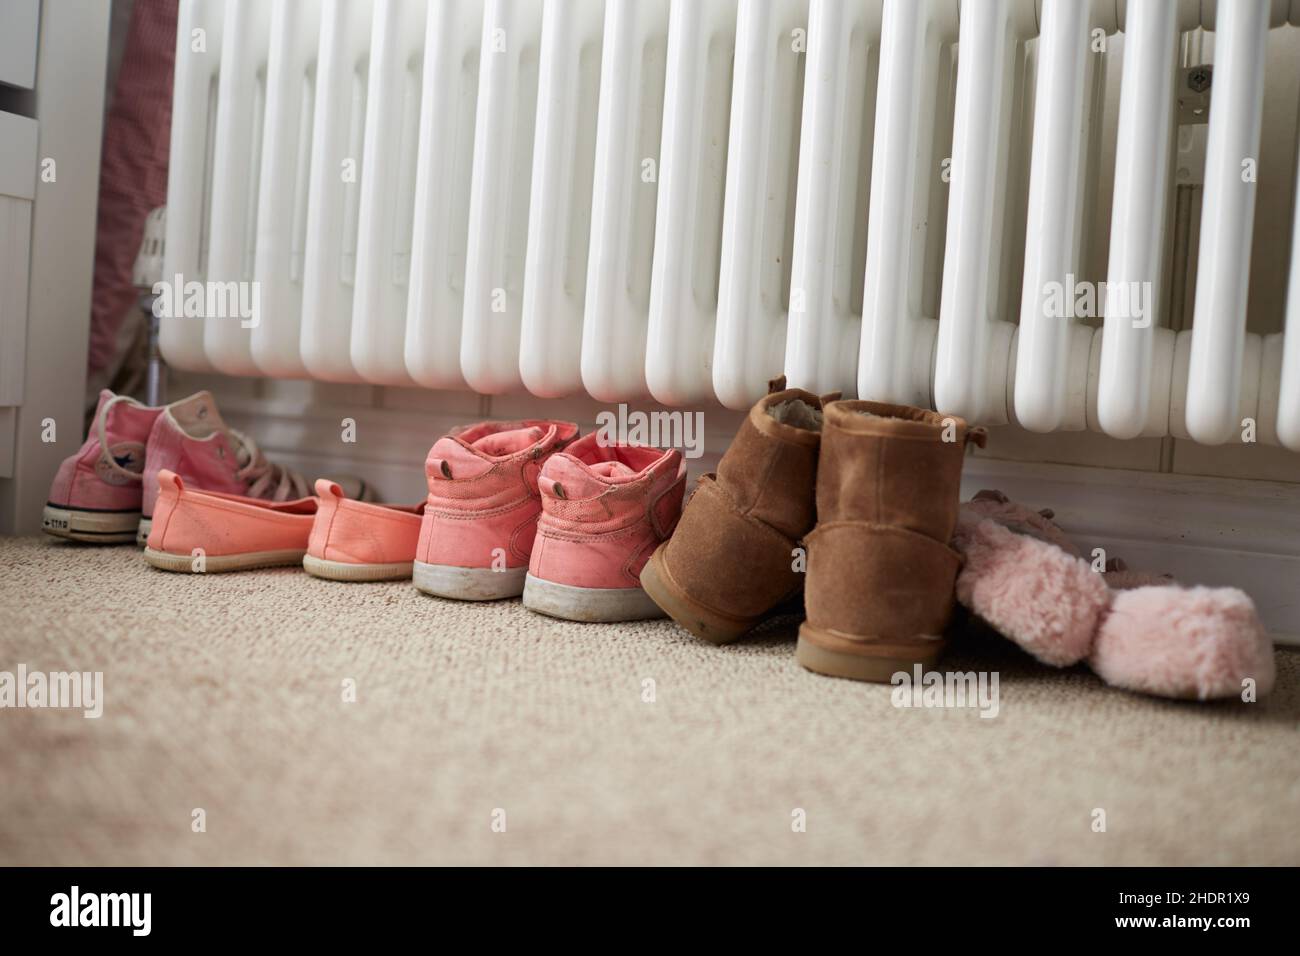 domestic life, children's shoes, at home, domestic lifes, living, children's shoe, shoe Stock Photo